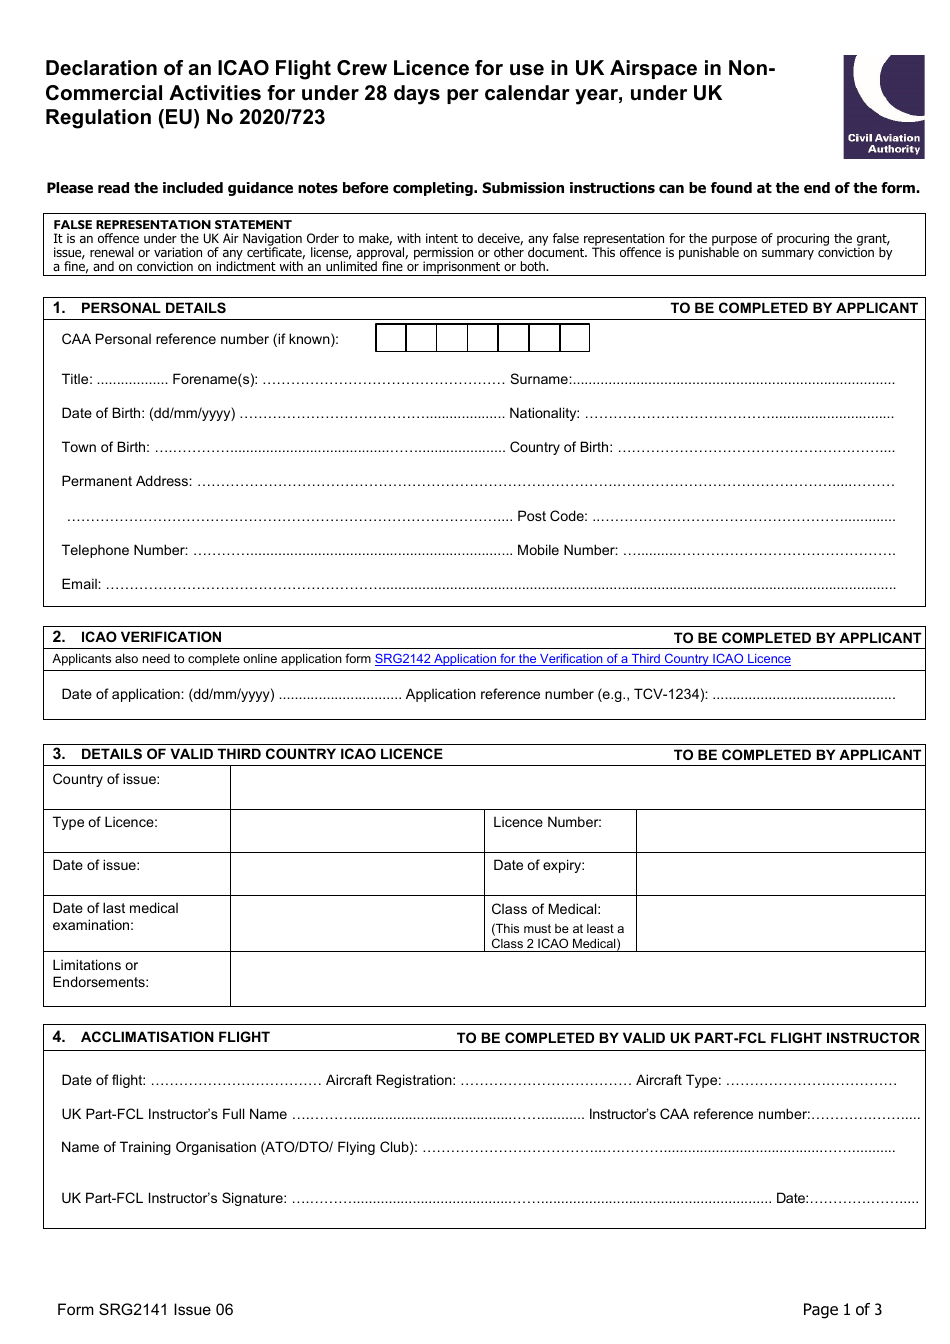 Form SRG2141 Declaration of an Icao Flight Crew Licence for Use in UK Airspace in Non-commercial Activities for Under 28 Days Per Calendar Year, Under UK Regulation (Eu) No 2020 / 723 - United Kingdom, Page 1